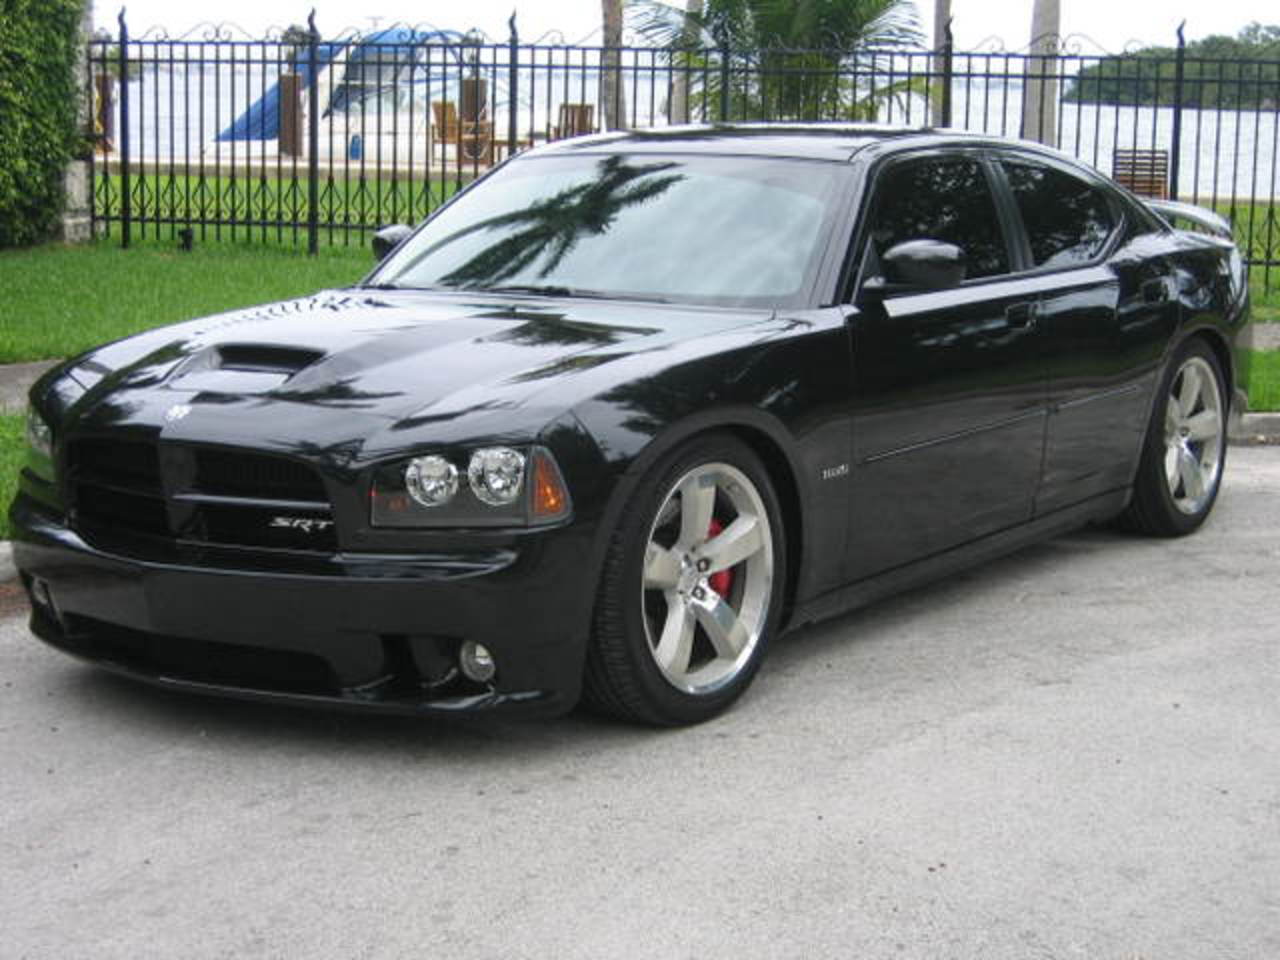 DODGE Charger SRT 8 Tuning